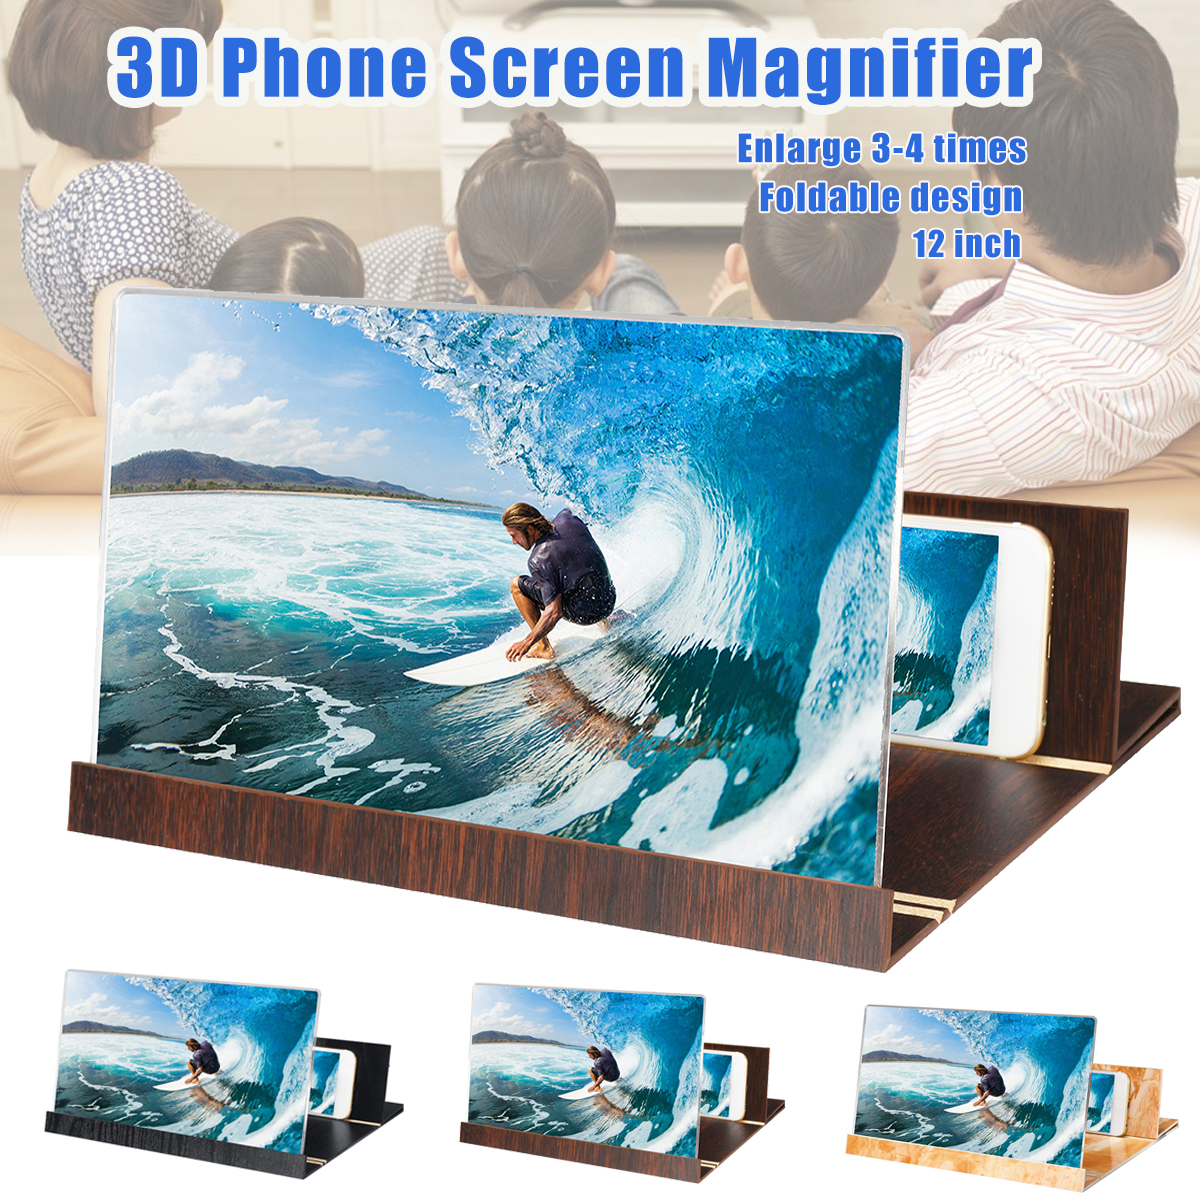 12quot-Wood-Foldable-3D-HD-Phone-Screen-Magnifier-Movie-Video-Amplifier-For-Smart-Phone-iPhone-XS-Ma-1534035-1